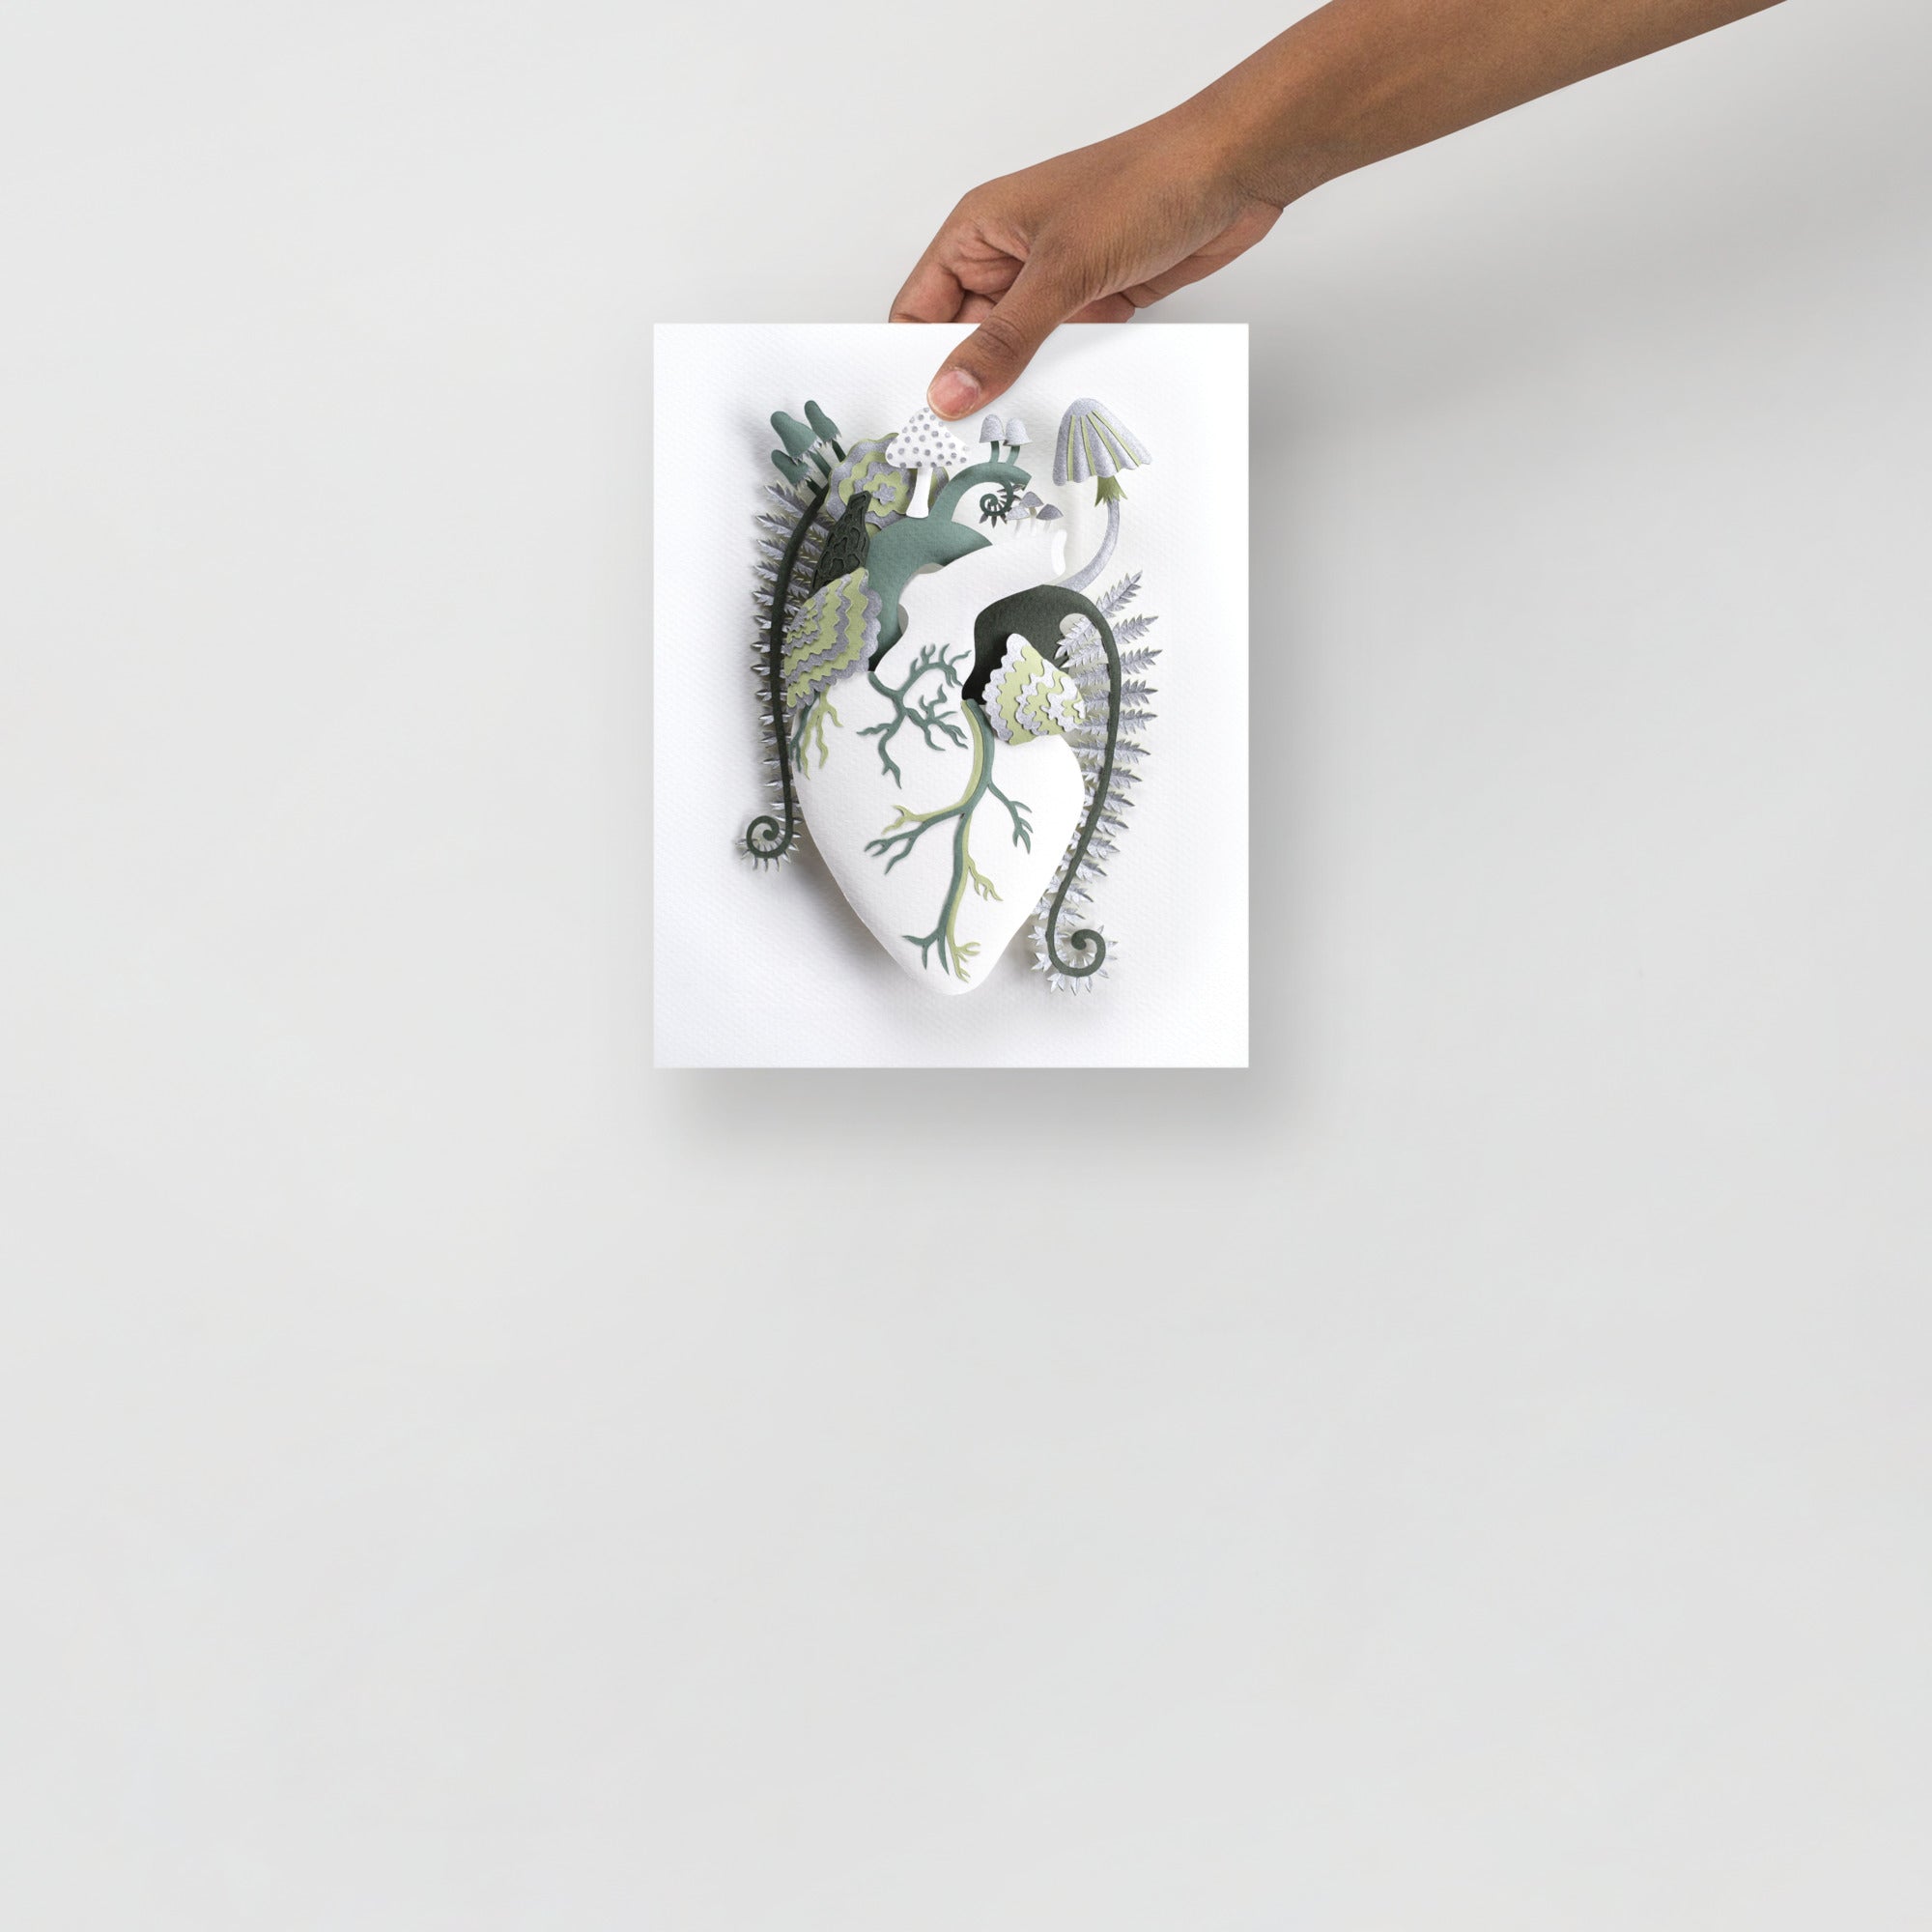 Anatomical heart with mushrooms and ferns made of hand cut paper